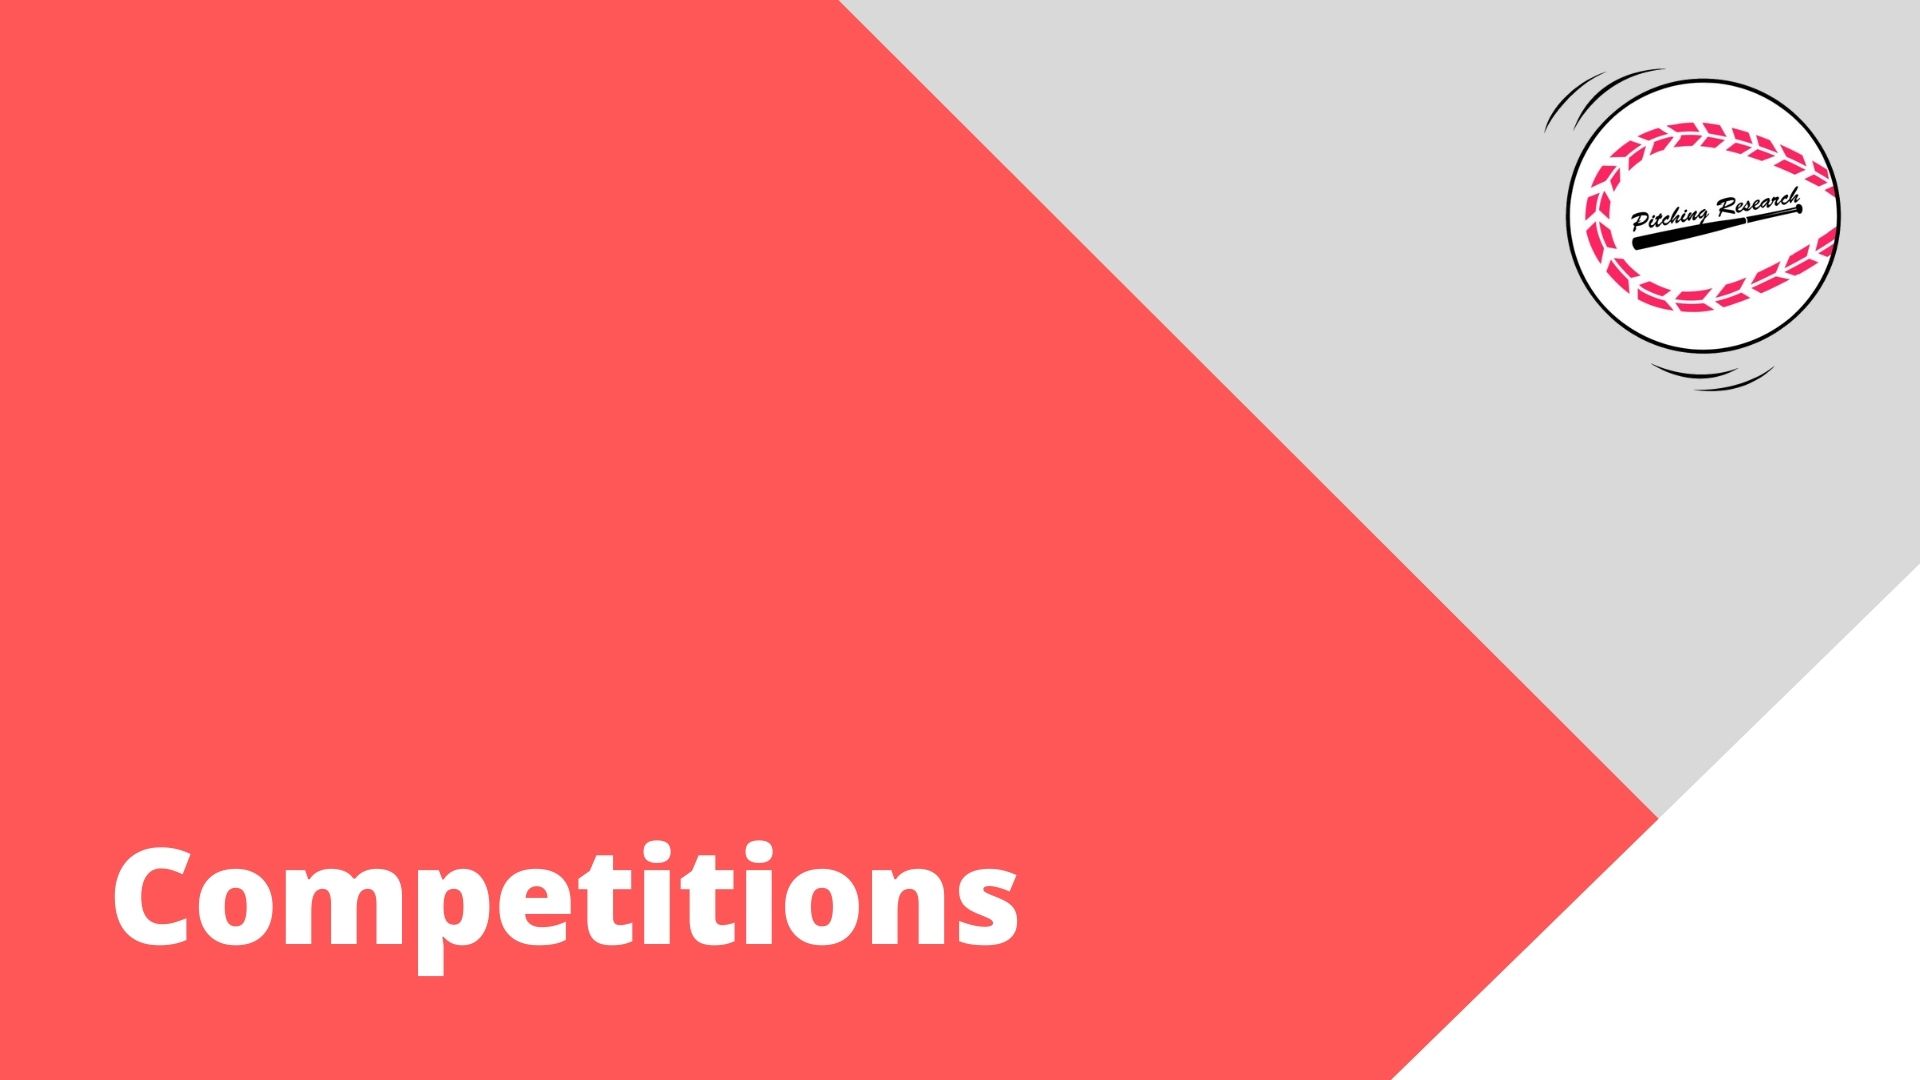 Competitions - Pitching Research